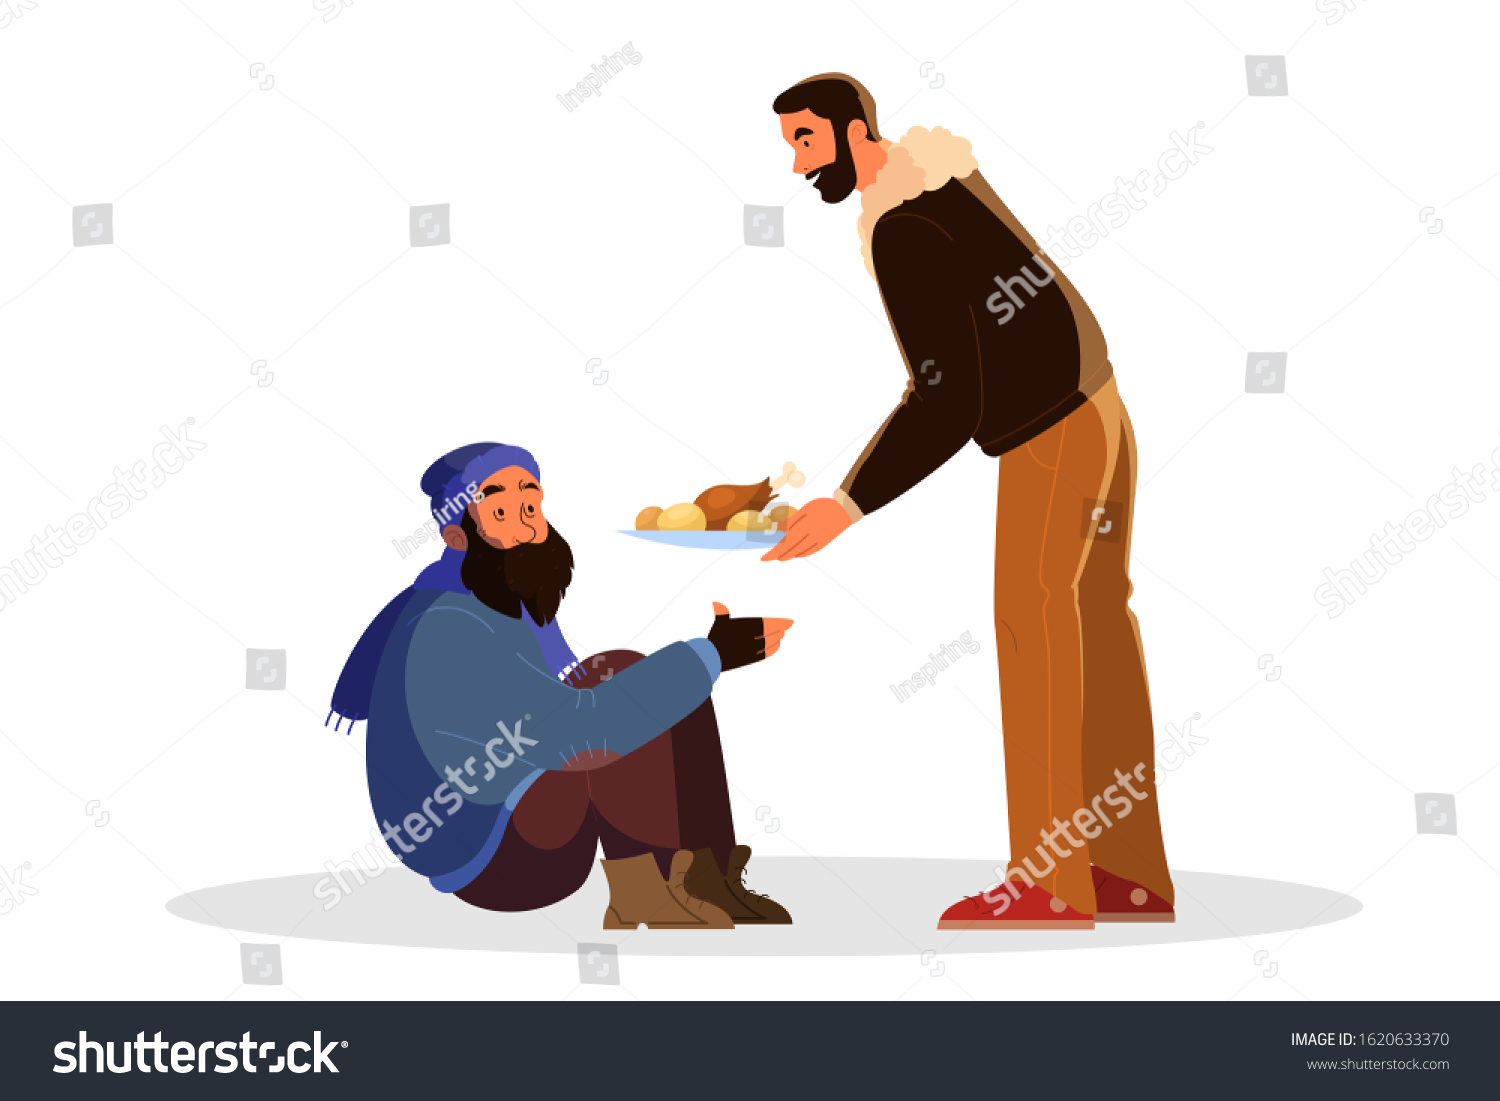 SVG of Volunteer help people idea. Charity community support homeless people, donate clothes, give a food. Idea of care and humanity. Vector illustration in cartoon style svg